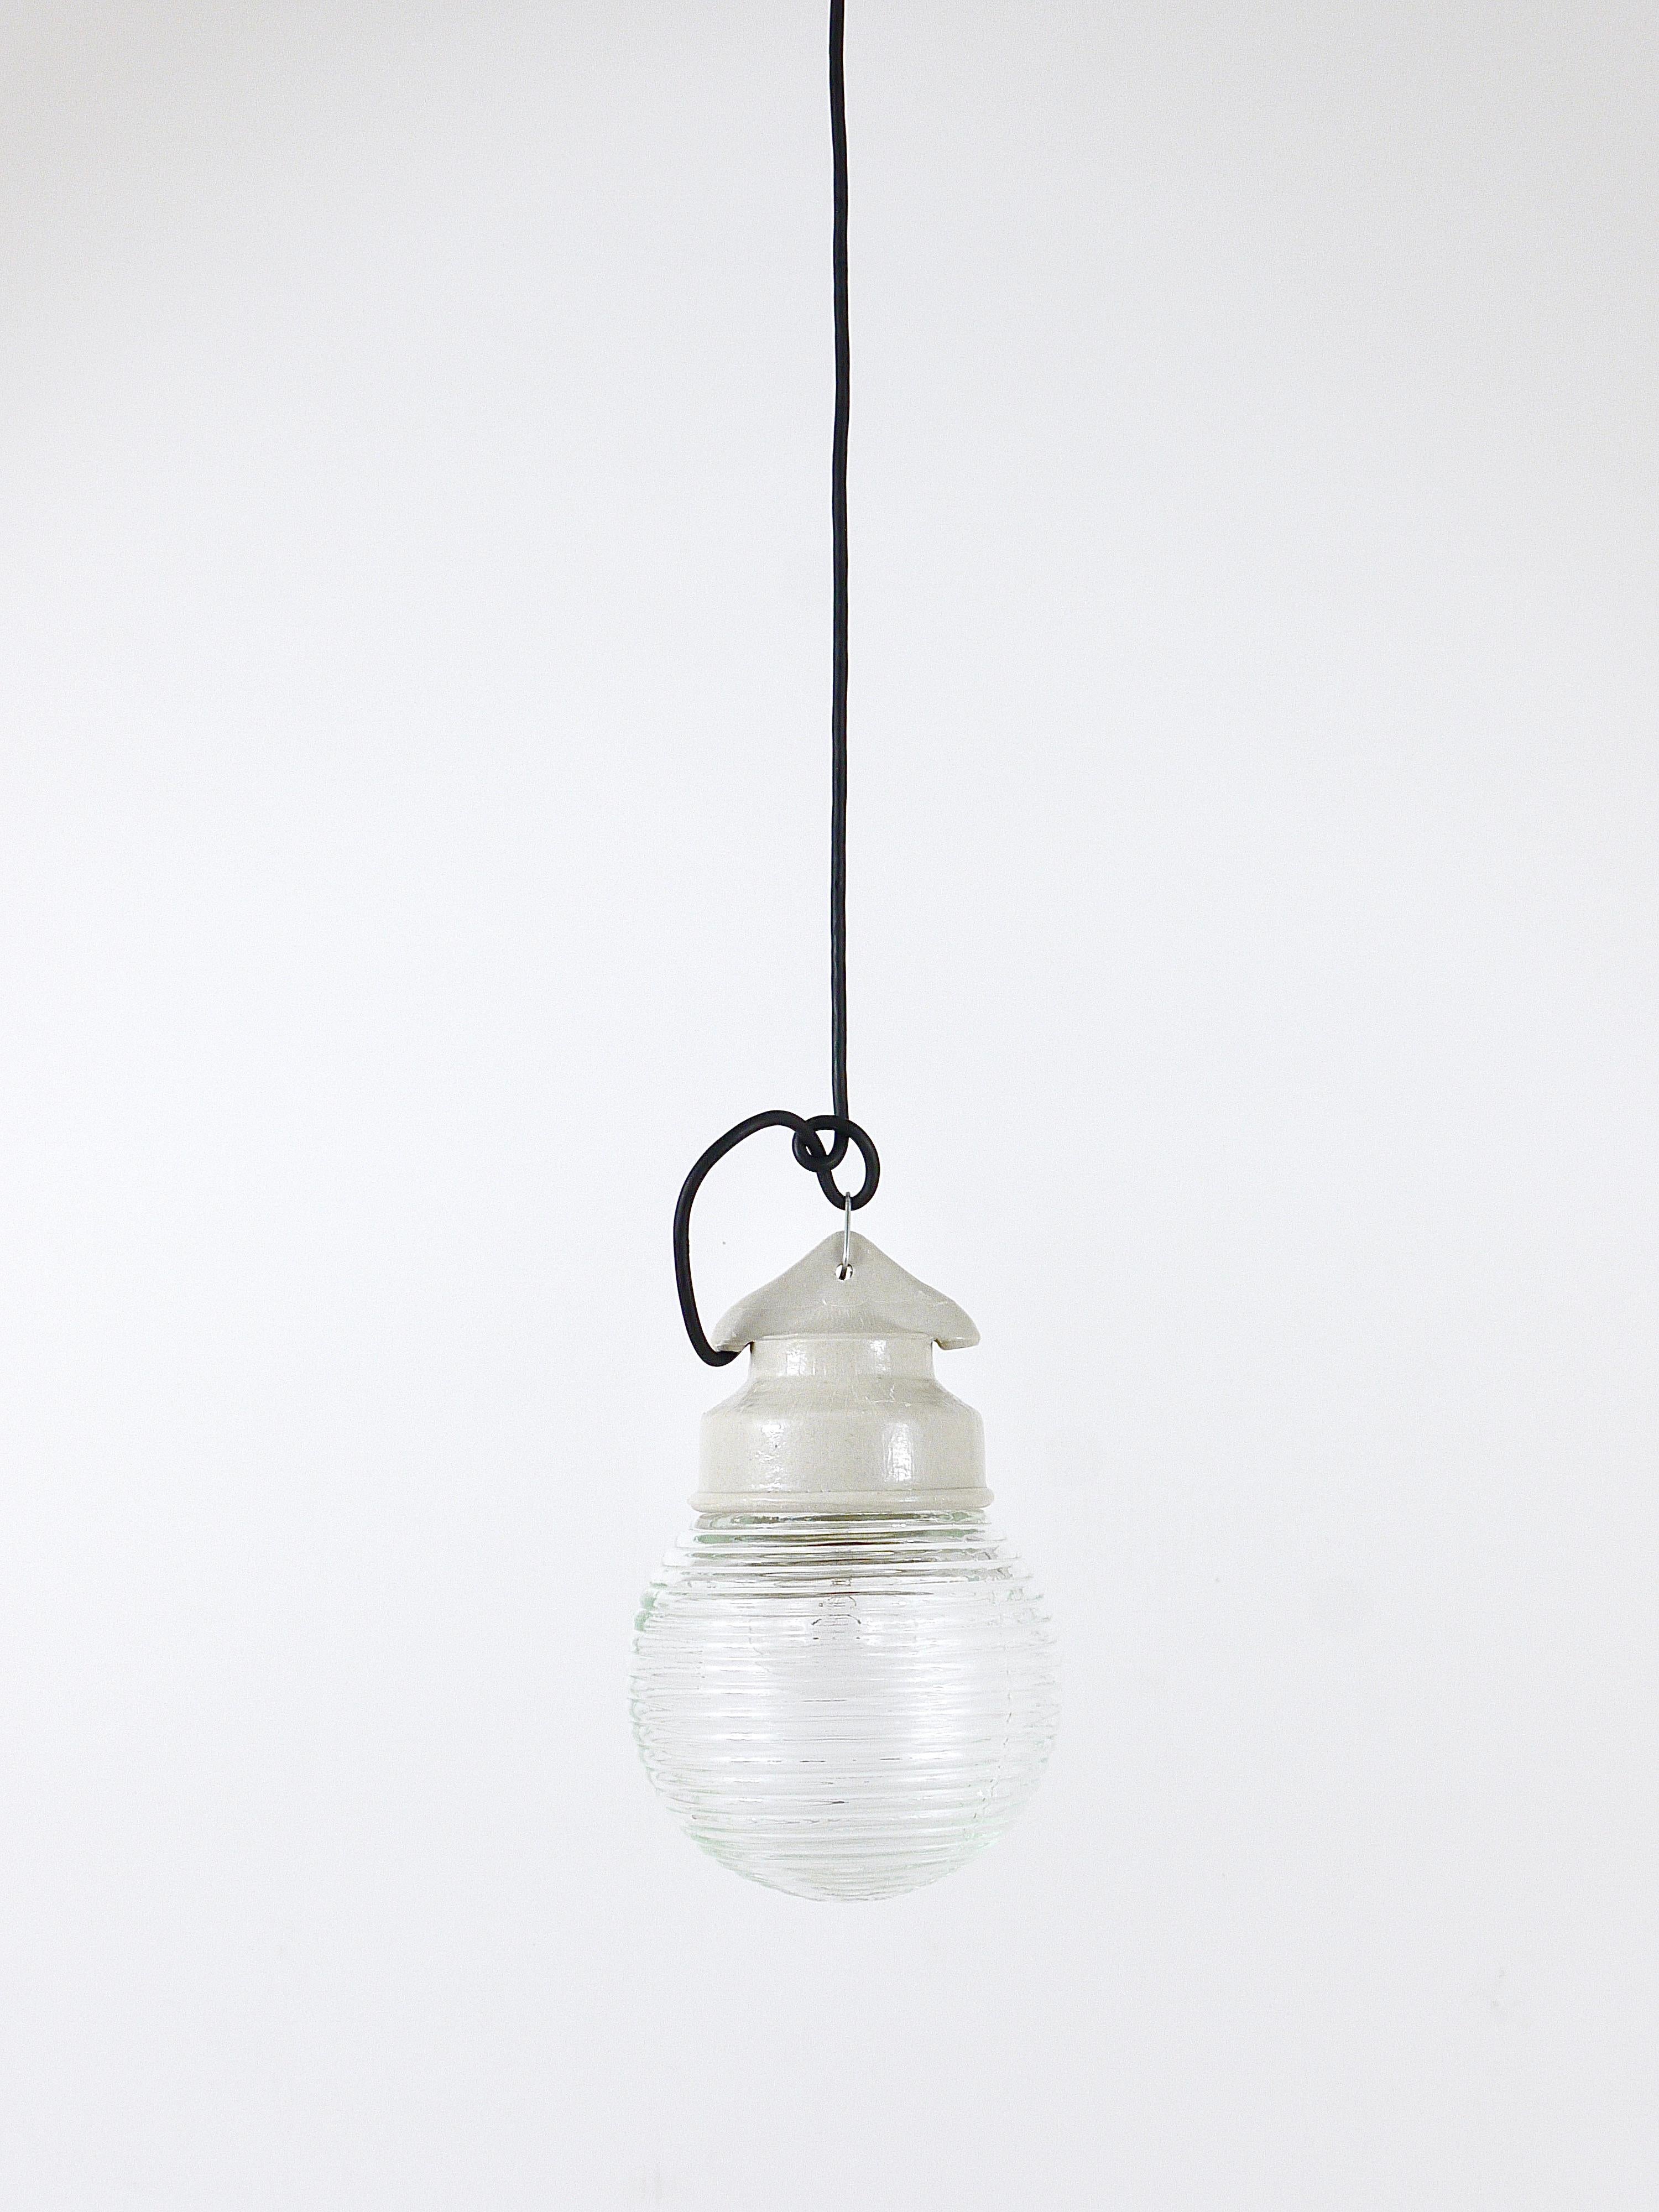 Up to 6 of these beautiful Holophane Industrial pendant lights / hanging lamps. Unused, in excellent 